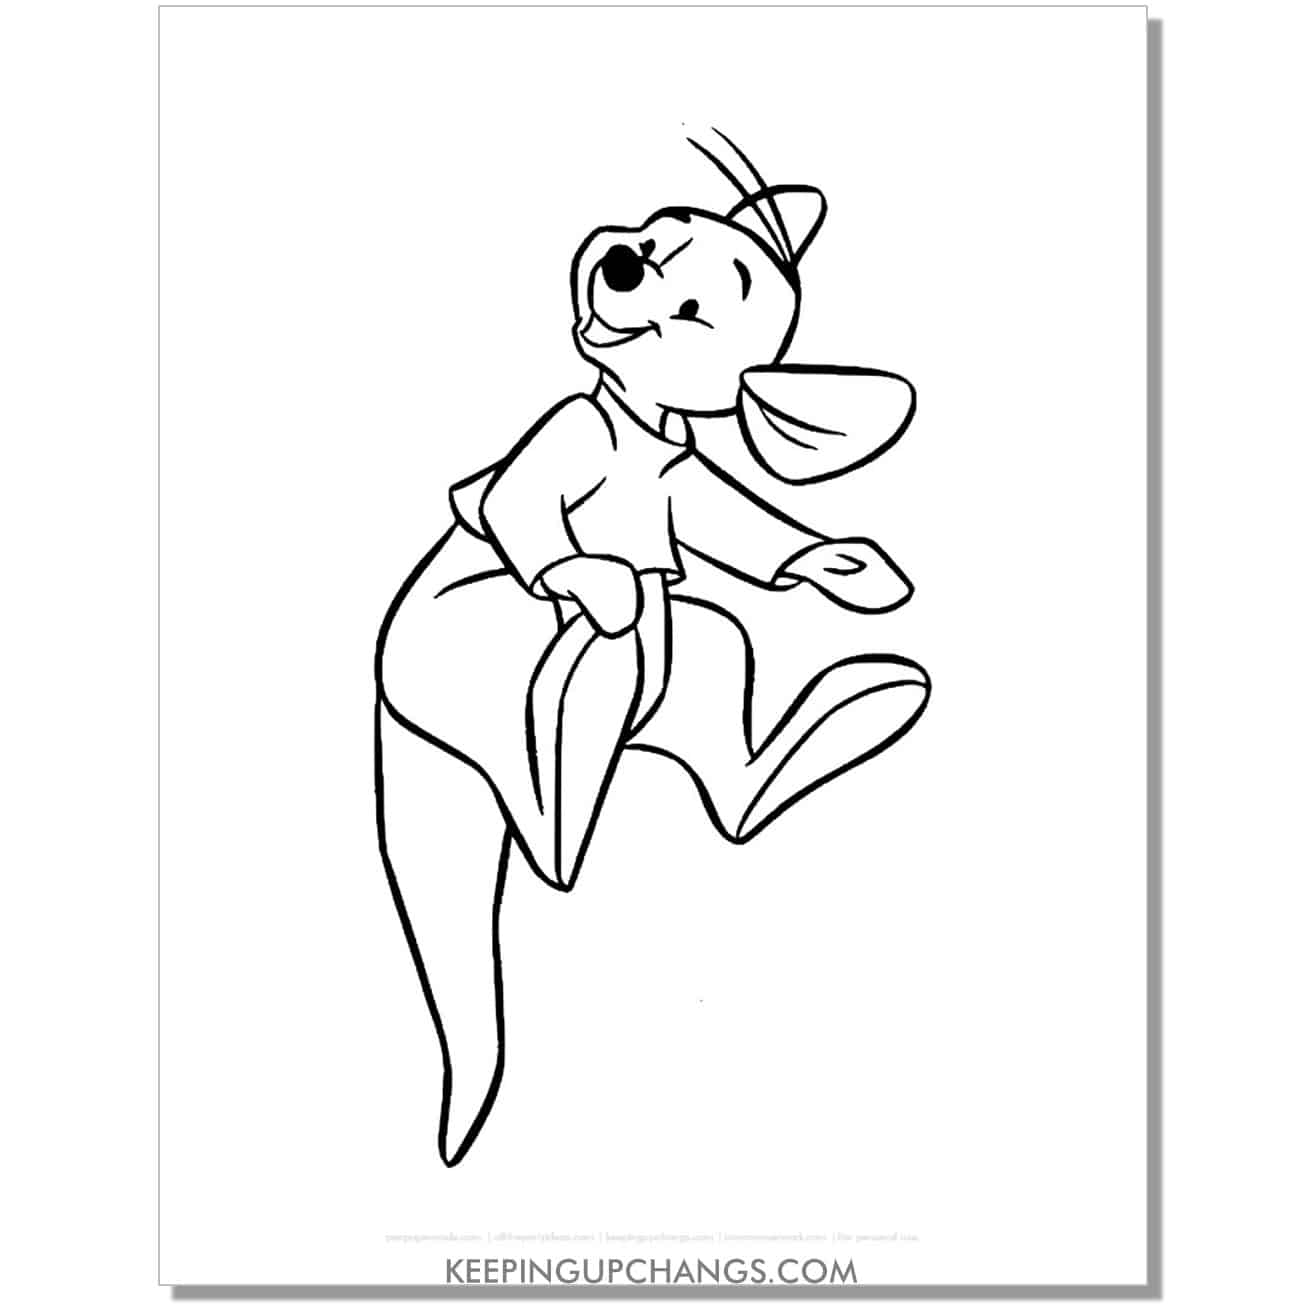 roo jumps coloring page, sheet.